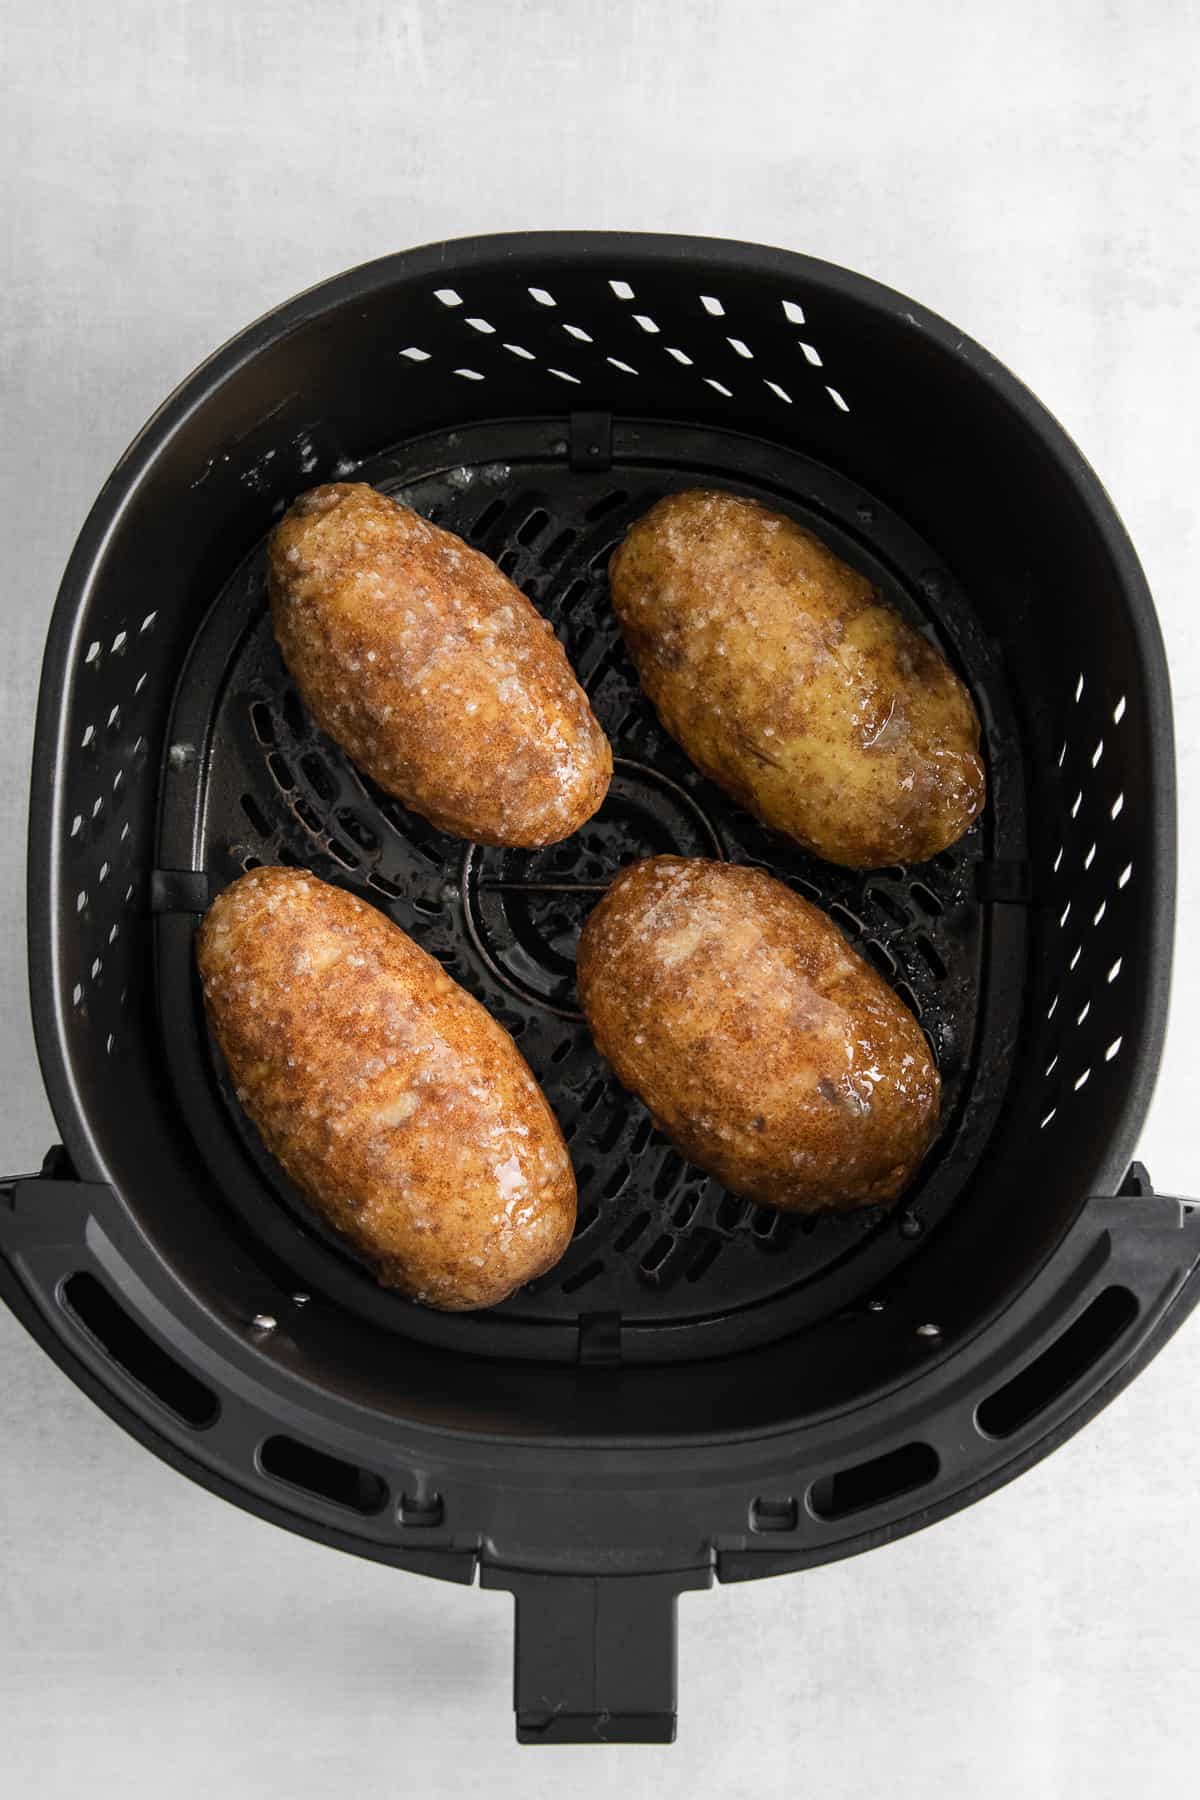 Oiled potatoes in an air fryer.